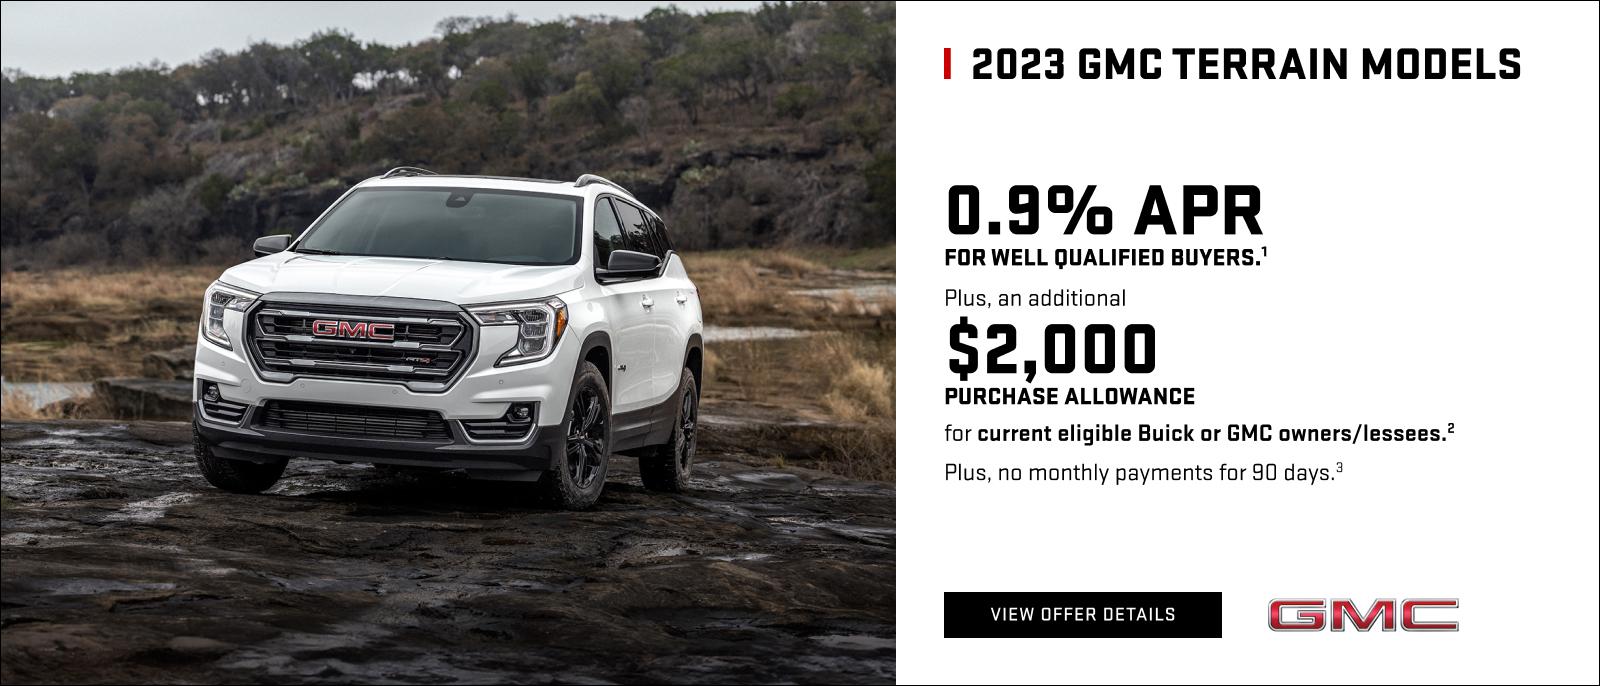 0.9% APR for well-qualified buyers.1

Plus, an additional $2,000 PURCHASE ALLOWANCE for current eligible Buick or GMC owners/lessees.2

Plus, no monthly payments for 90 days. 3